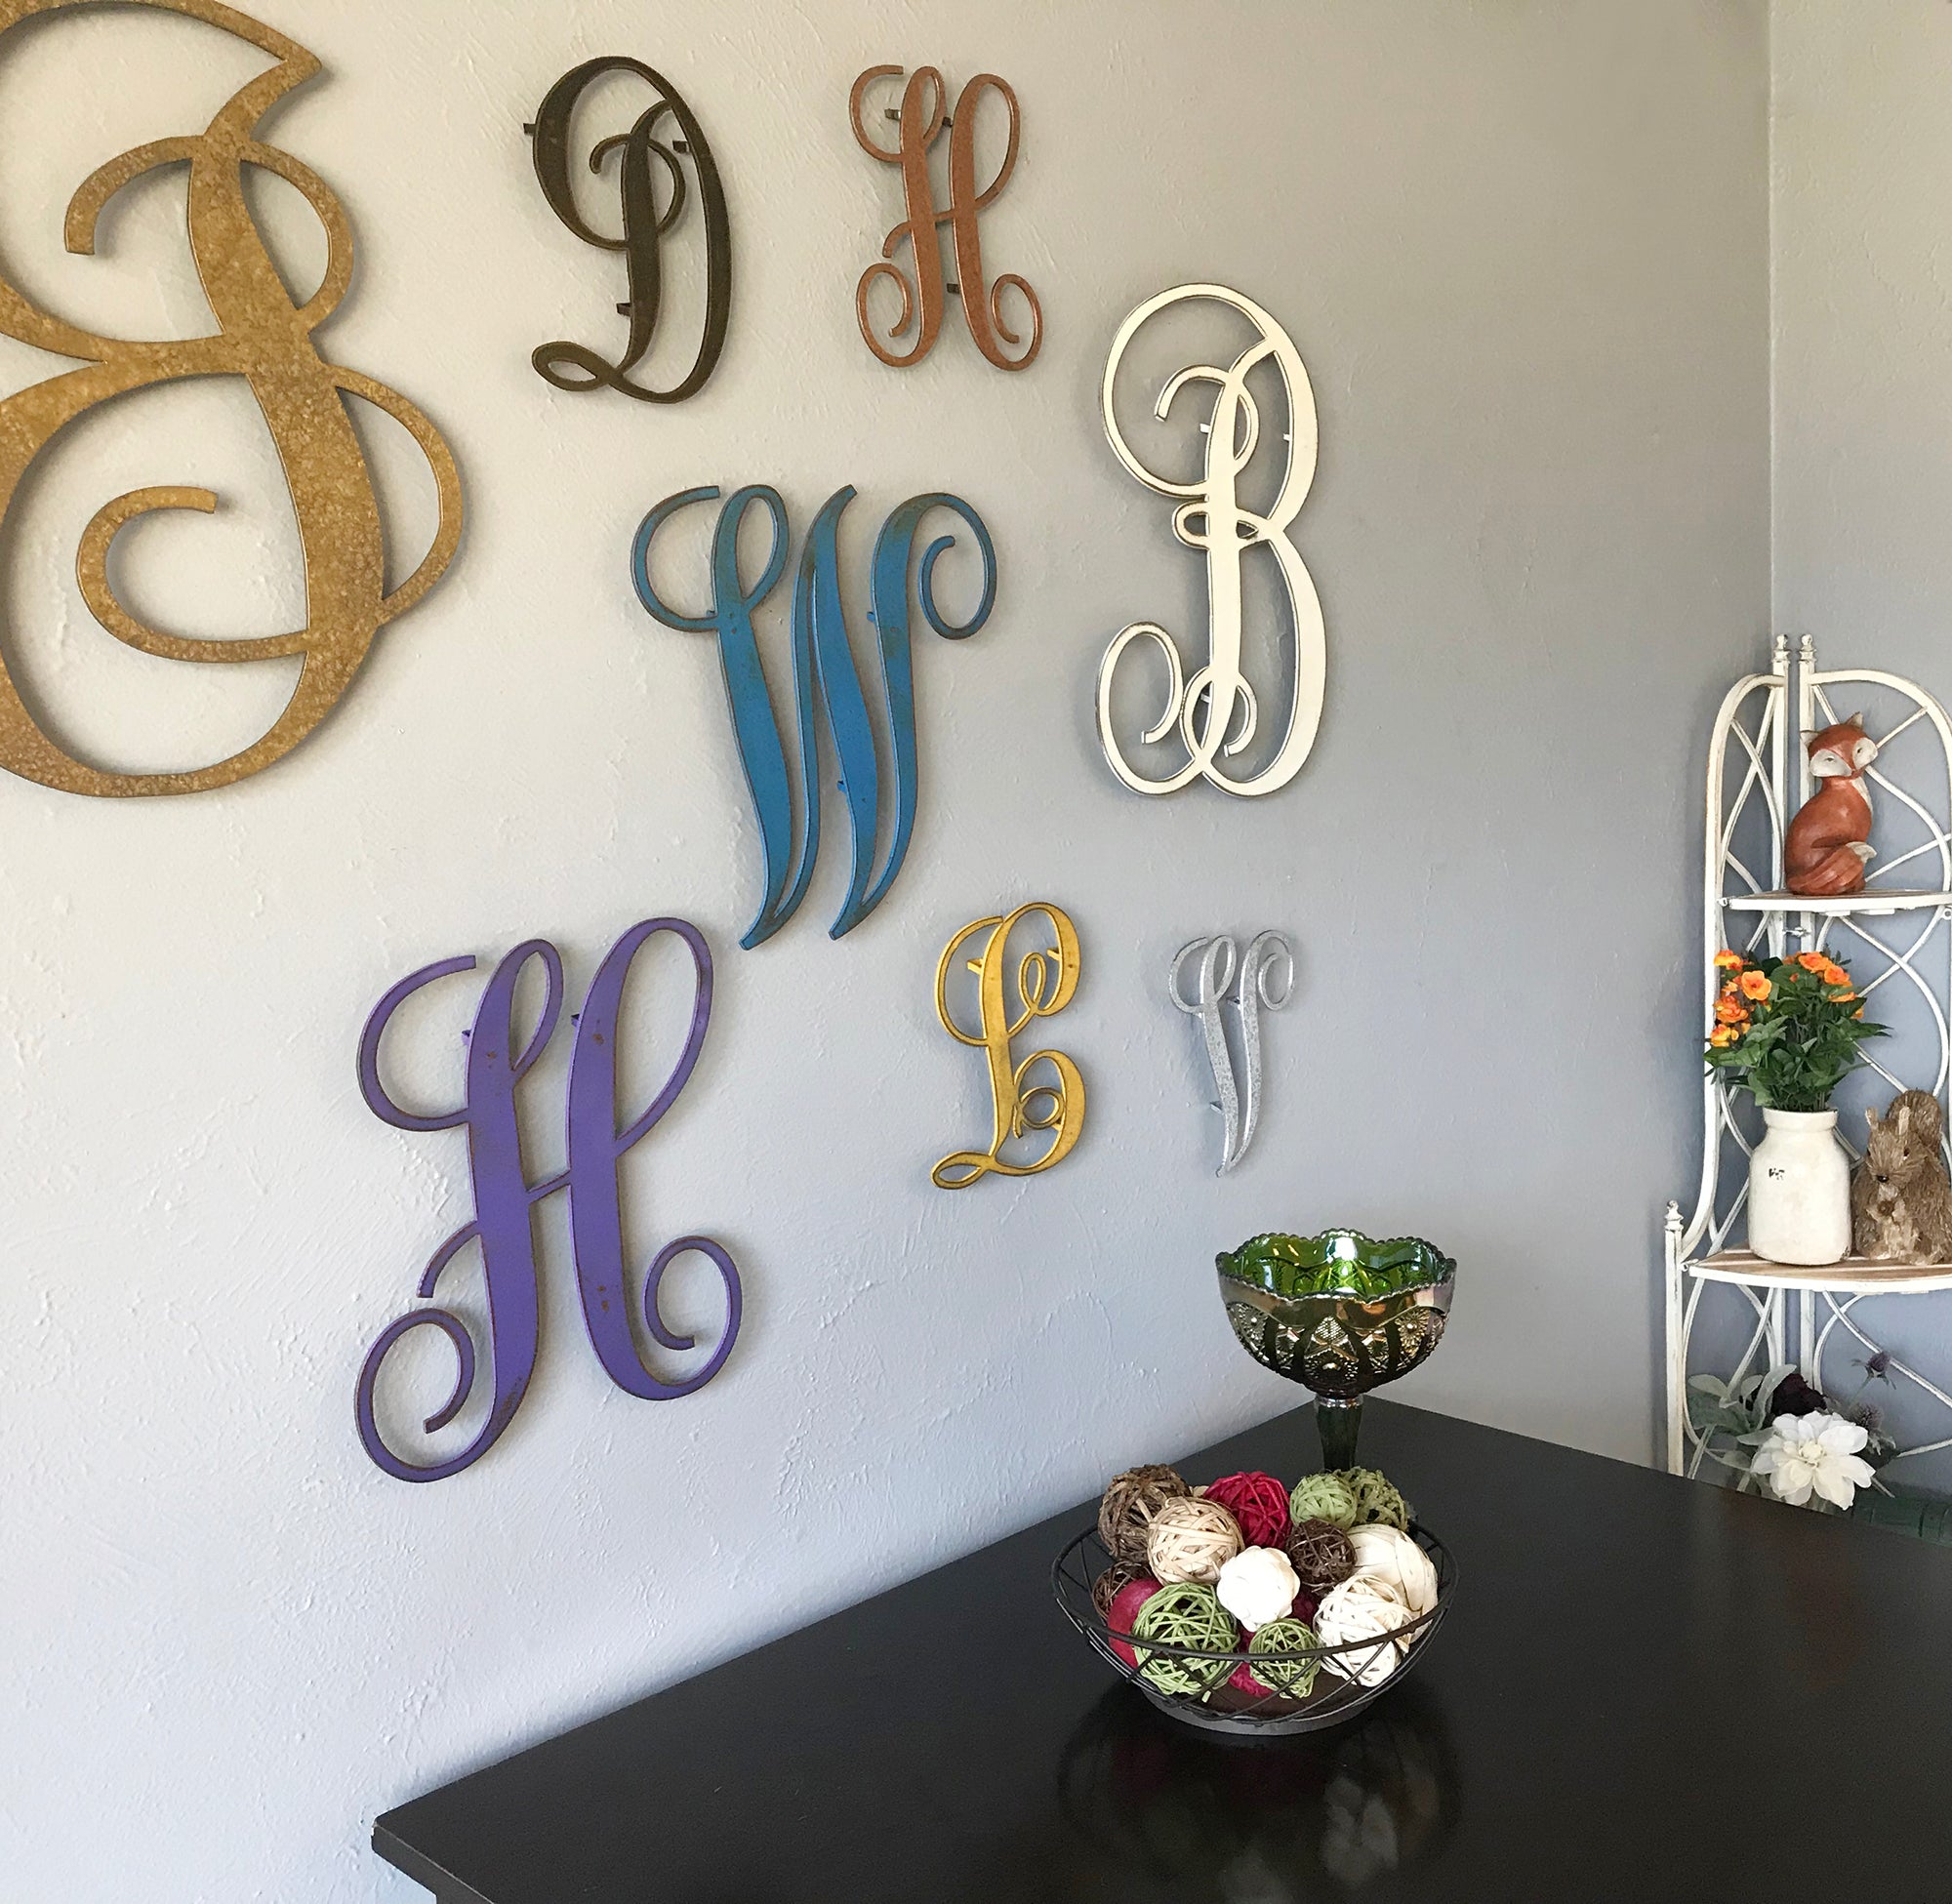 Letter B - Monogram Font - Metal Wall Art Home Decor - Made in USA